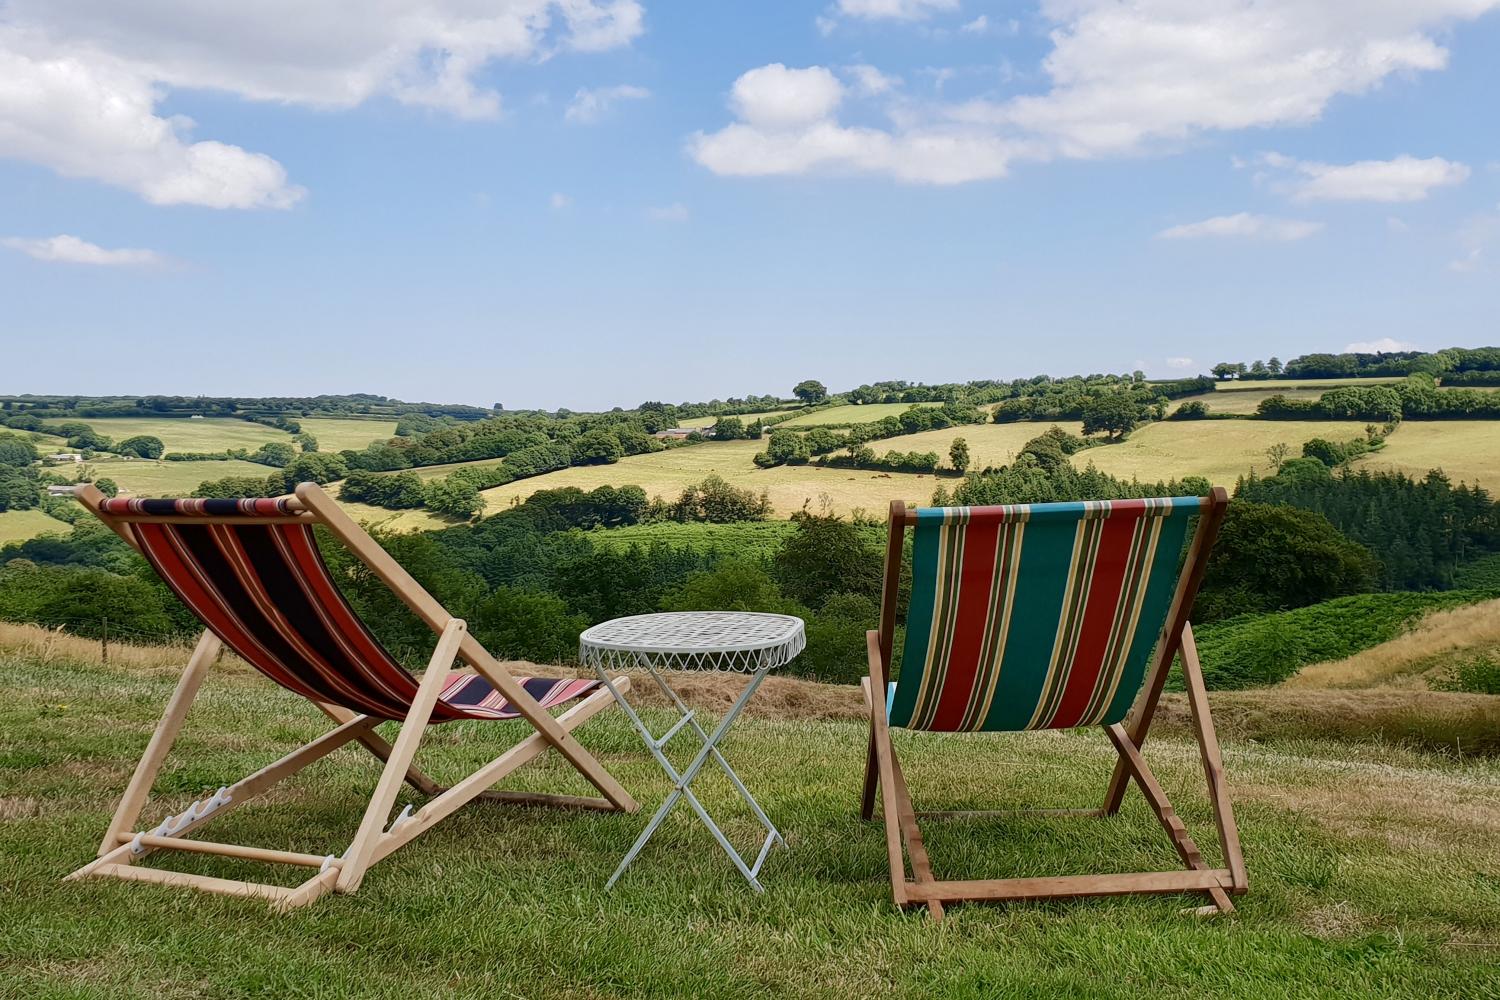 Deckchairs for our guests to enjoy